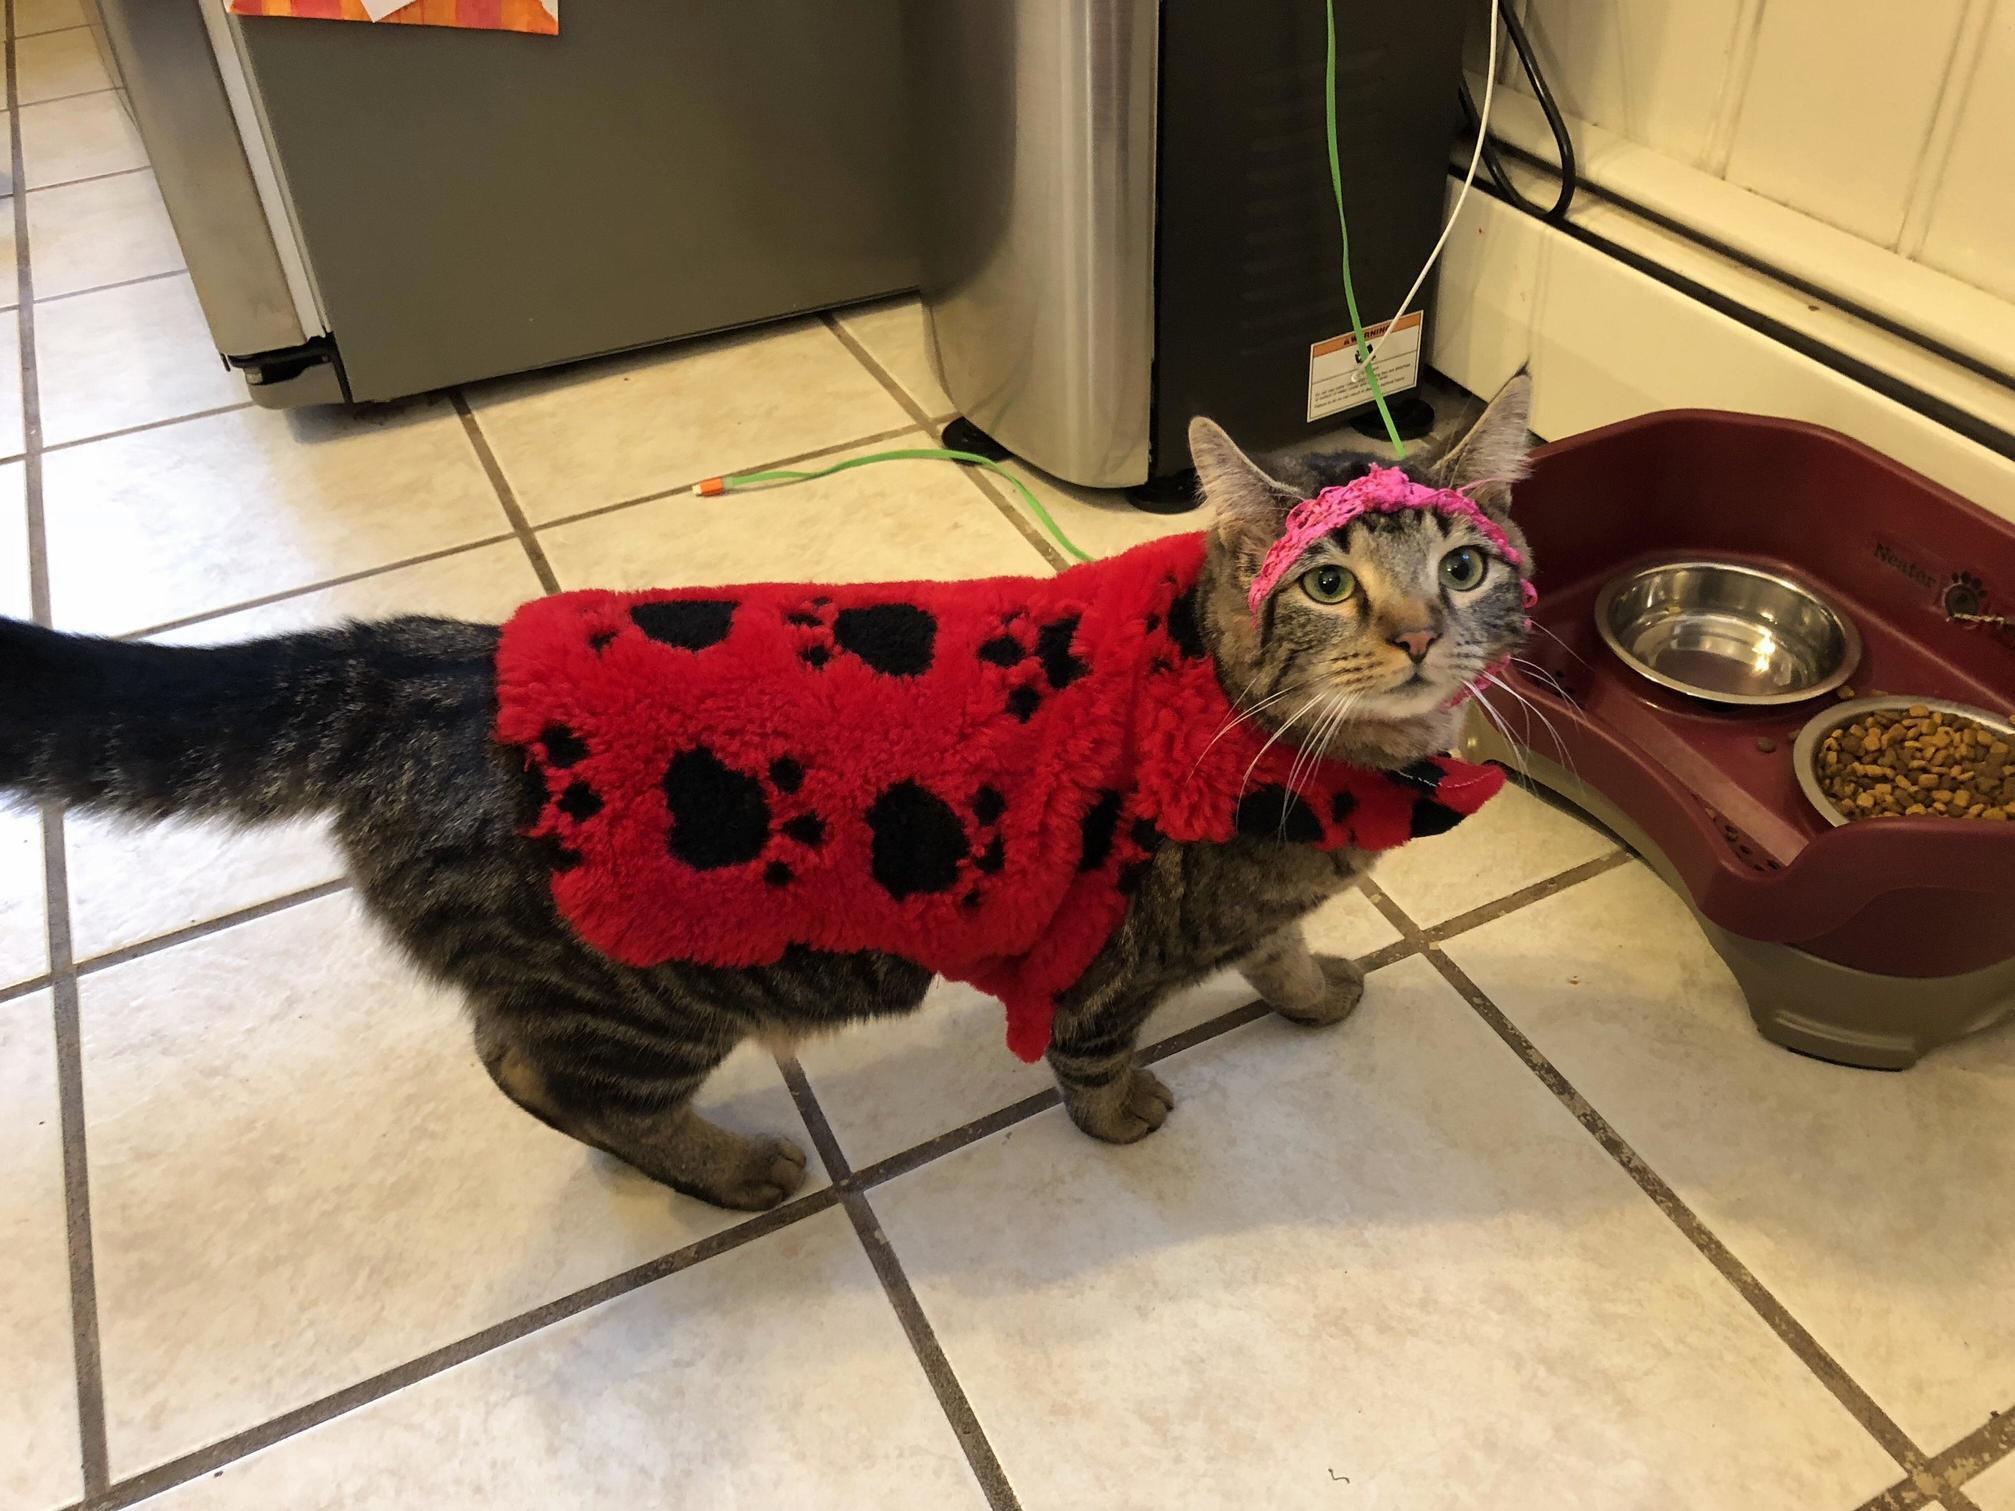 At a friends house…her daughter likes to dress up the cat.